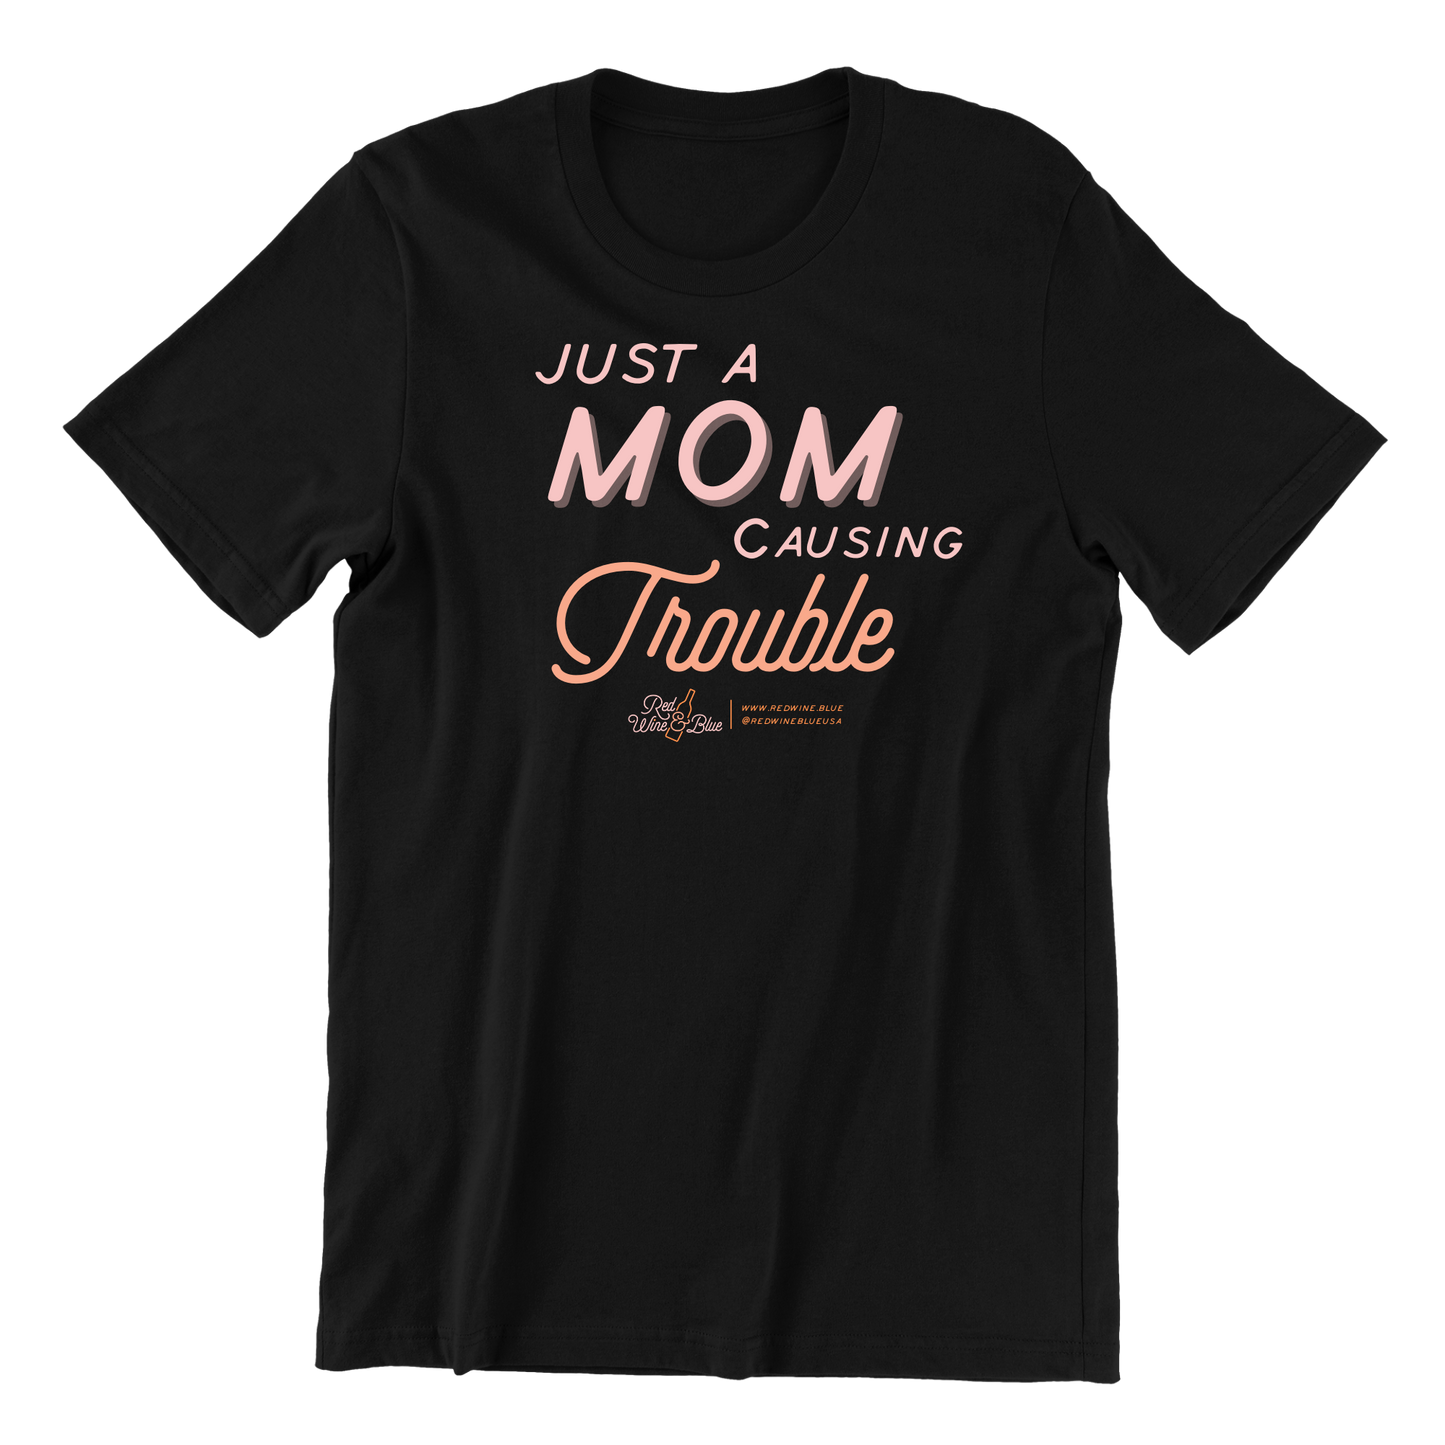 Just a Mom Causing Trouble T-Shirt